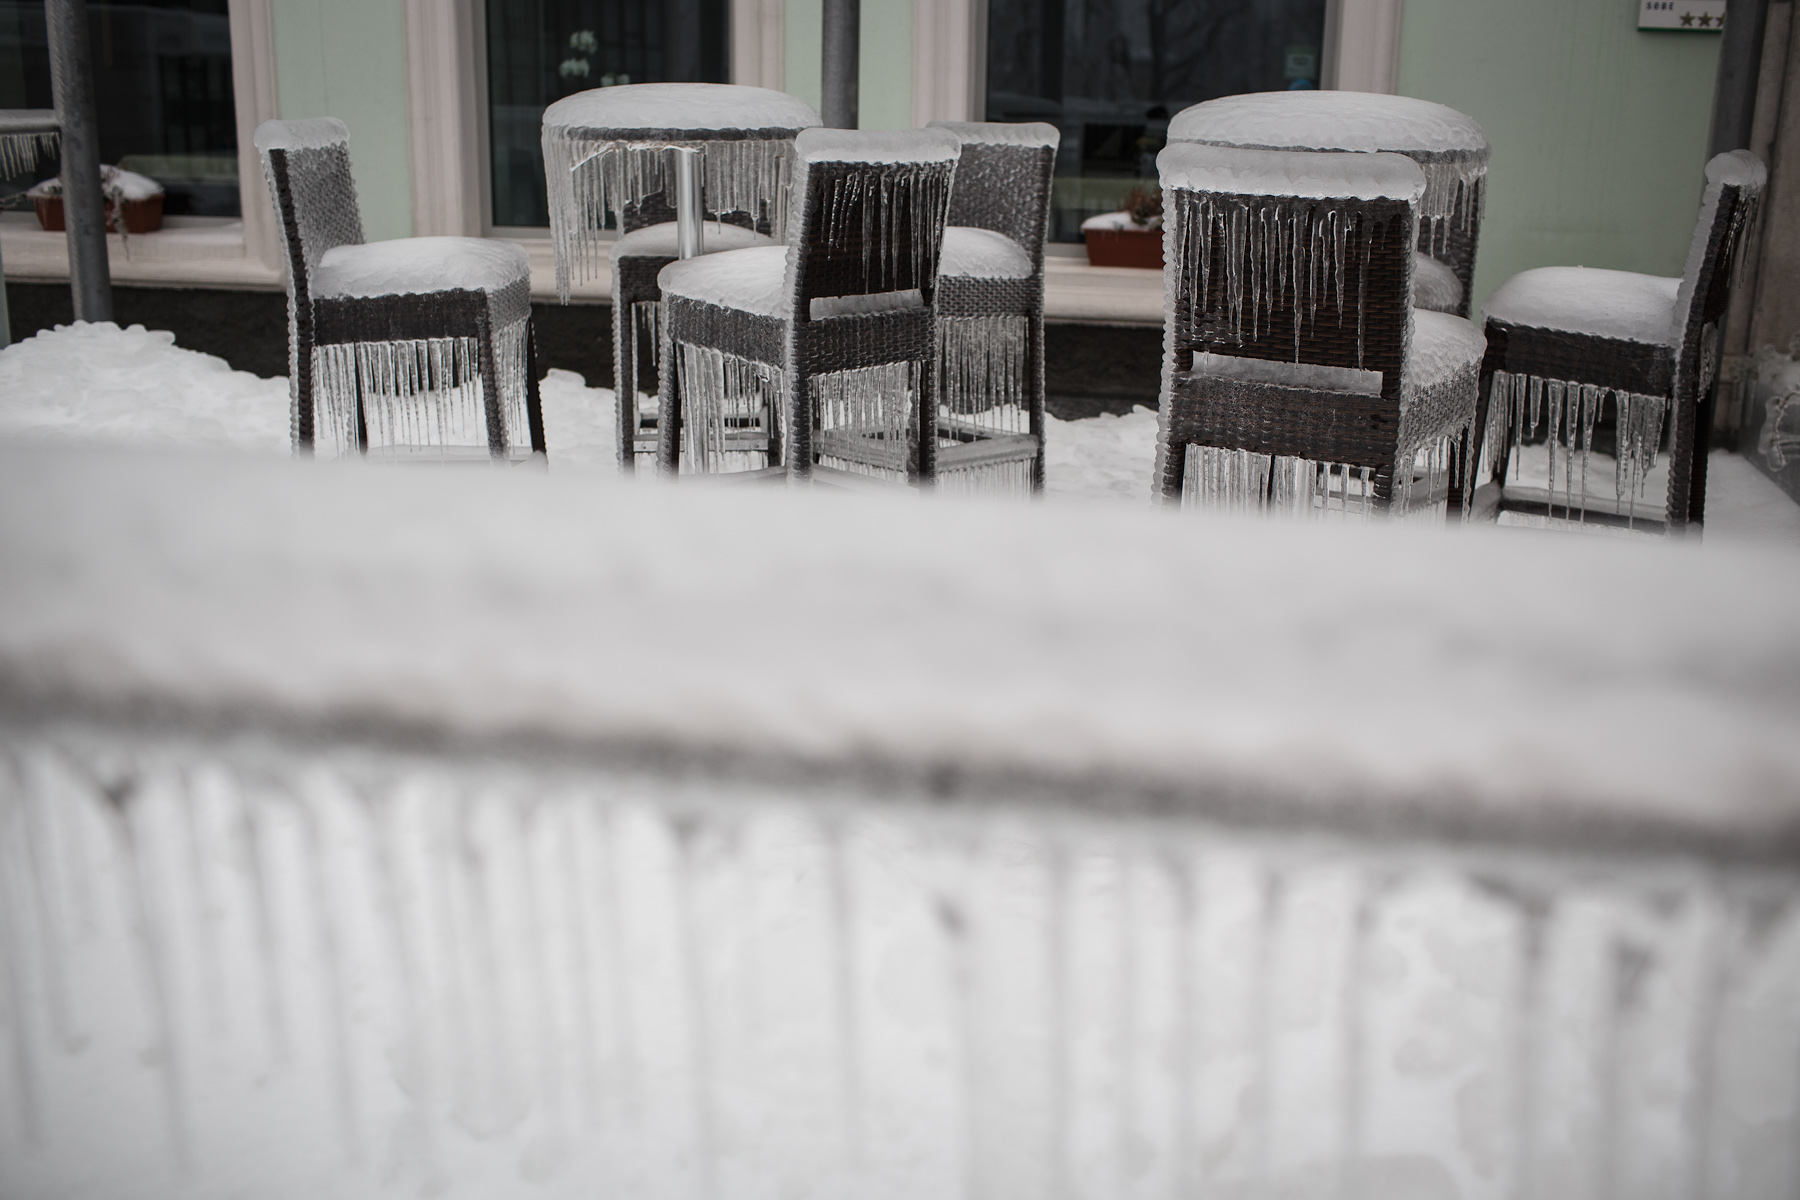 A terrace of a hotel is seen covered in ice in Postojna, Slovenia, February 5 2014.